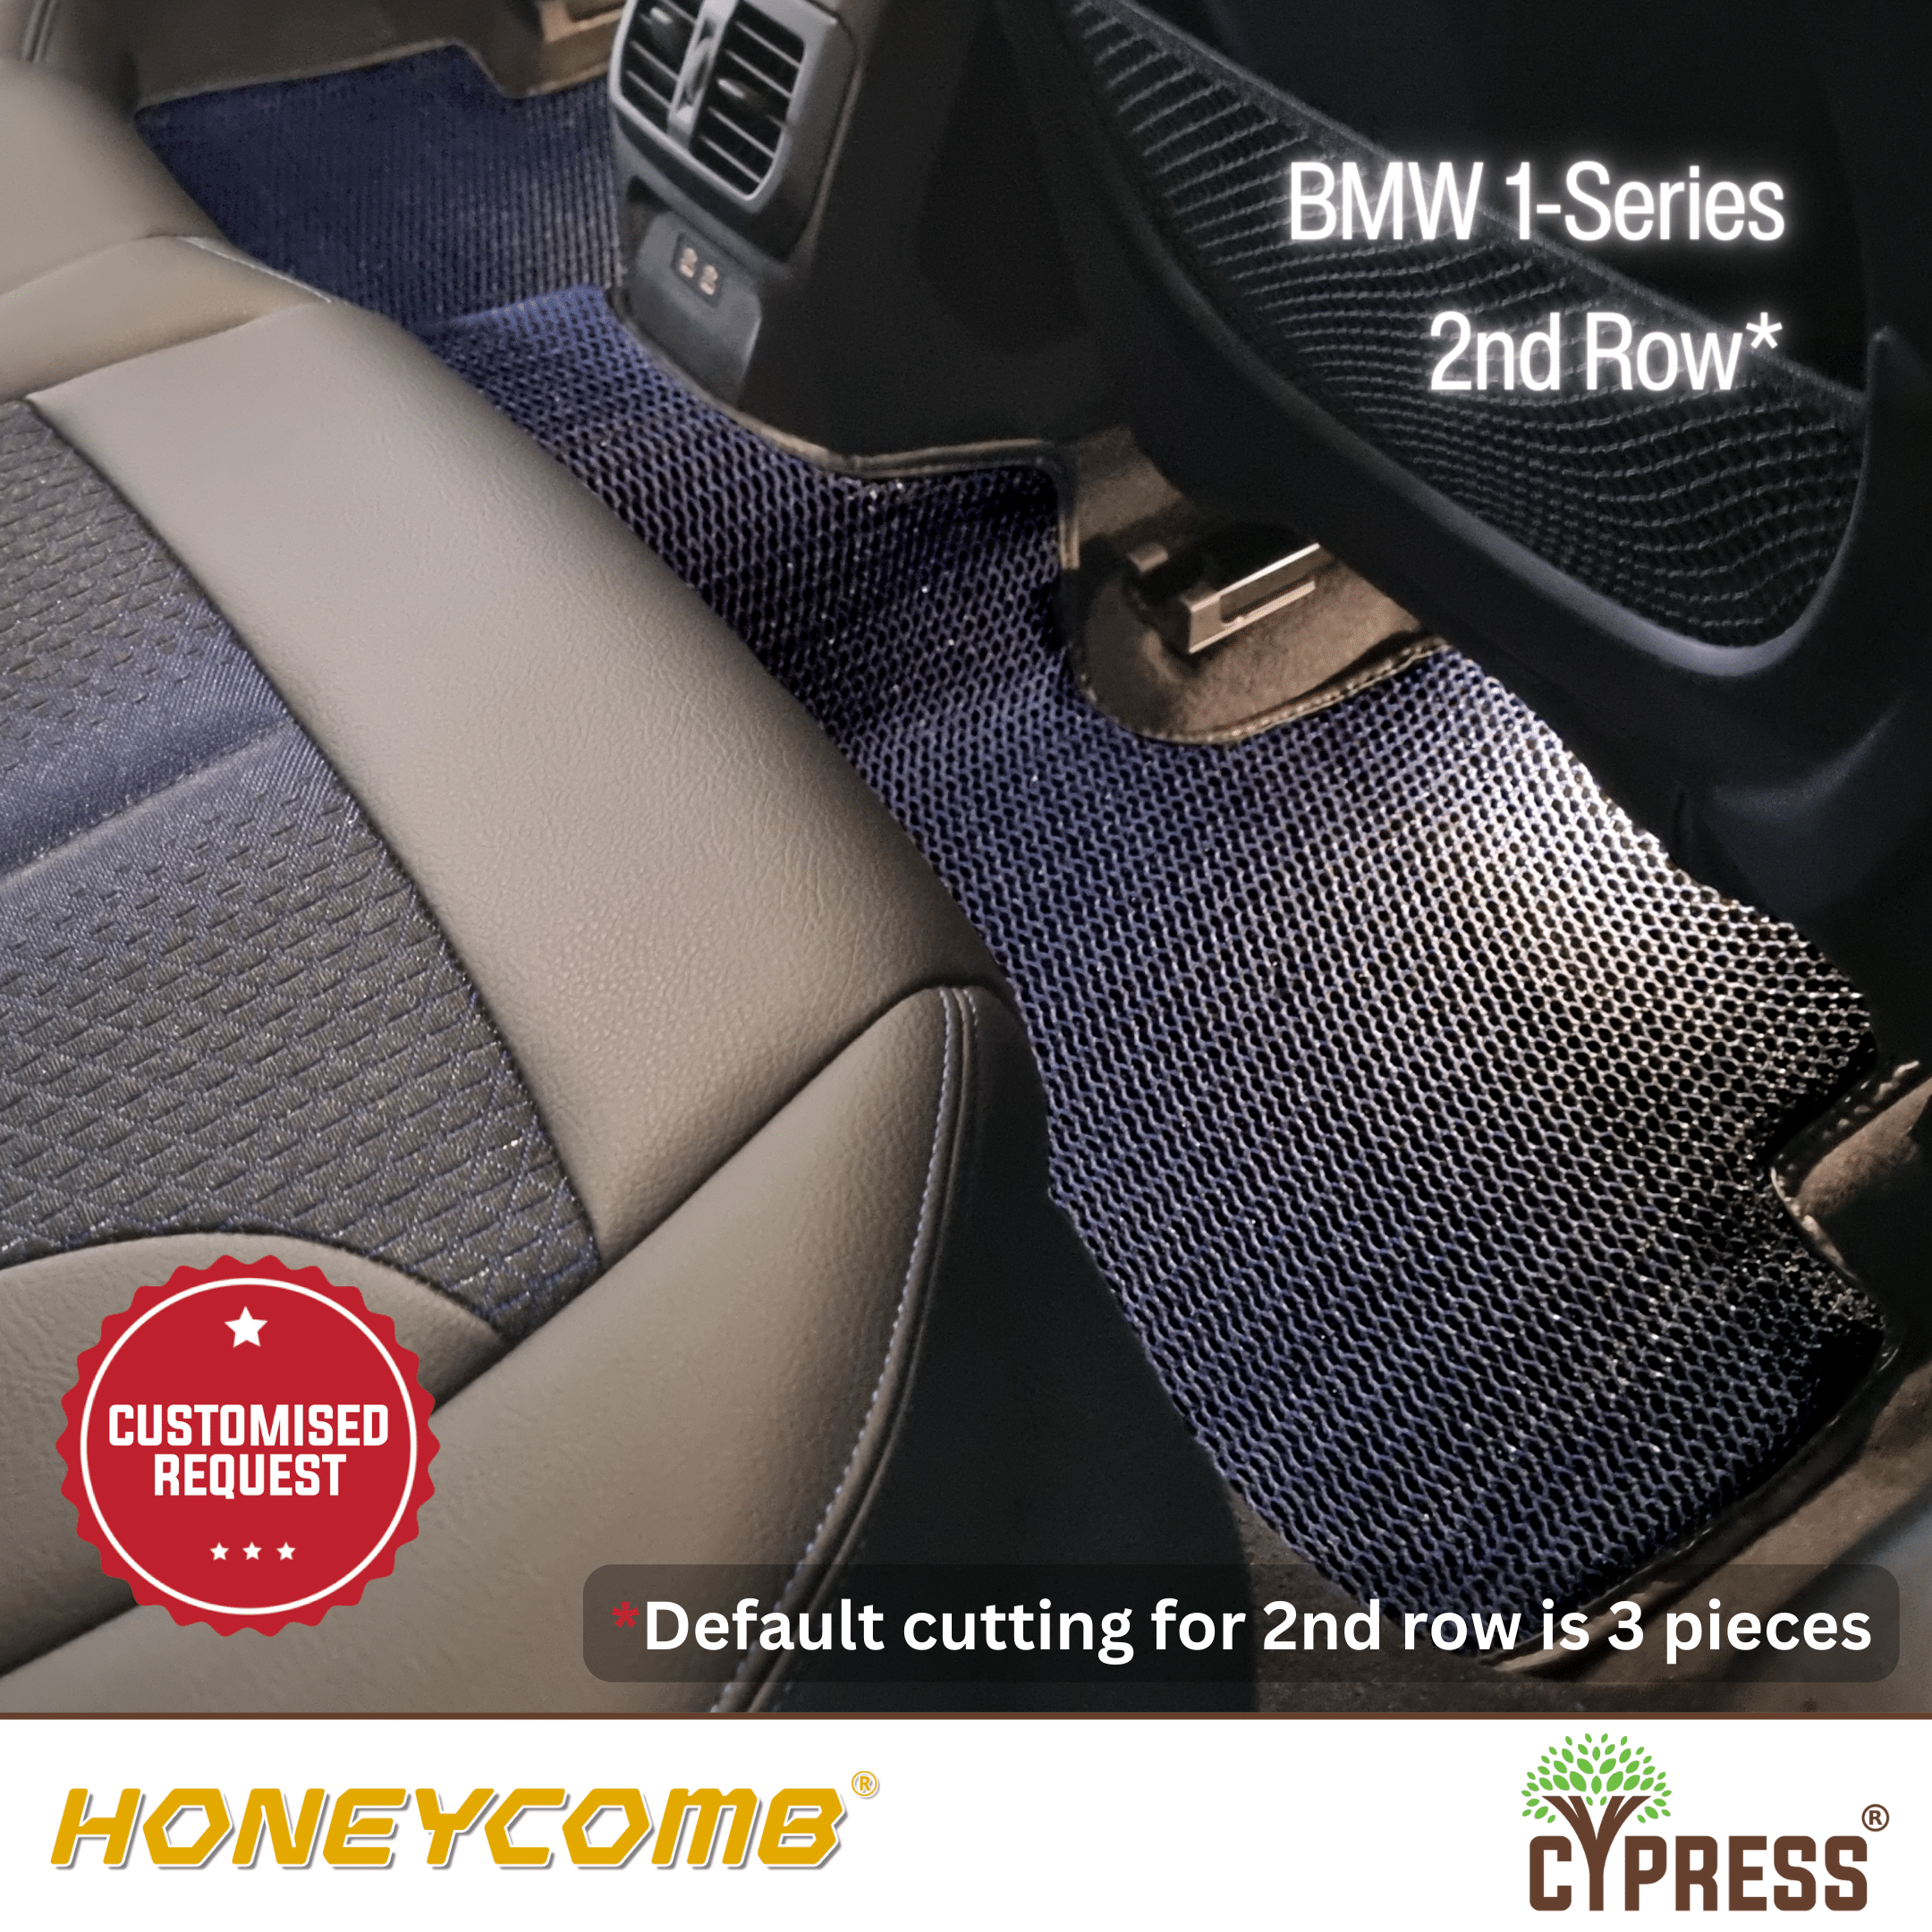 BMW 1-Series Honeycomb Special Request (2nd Row)